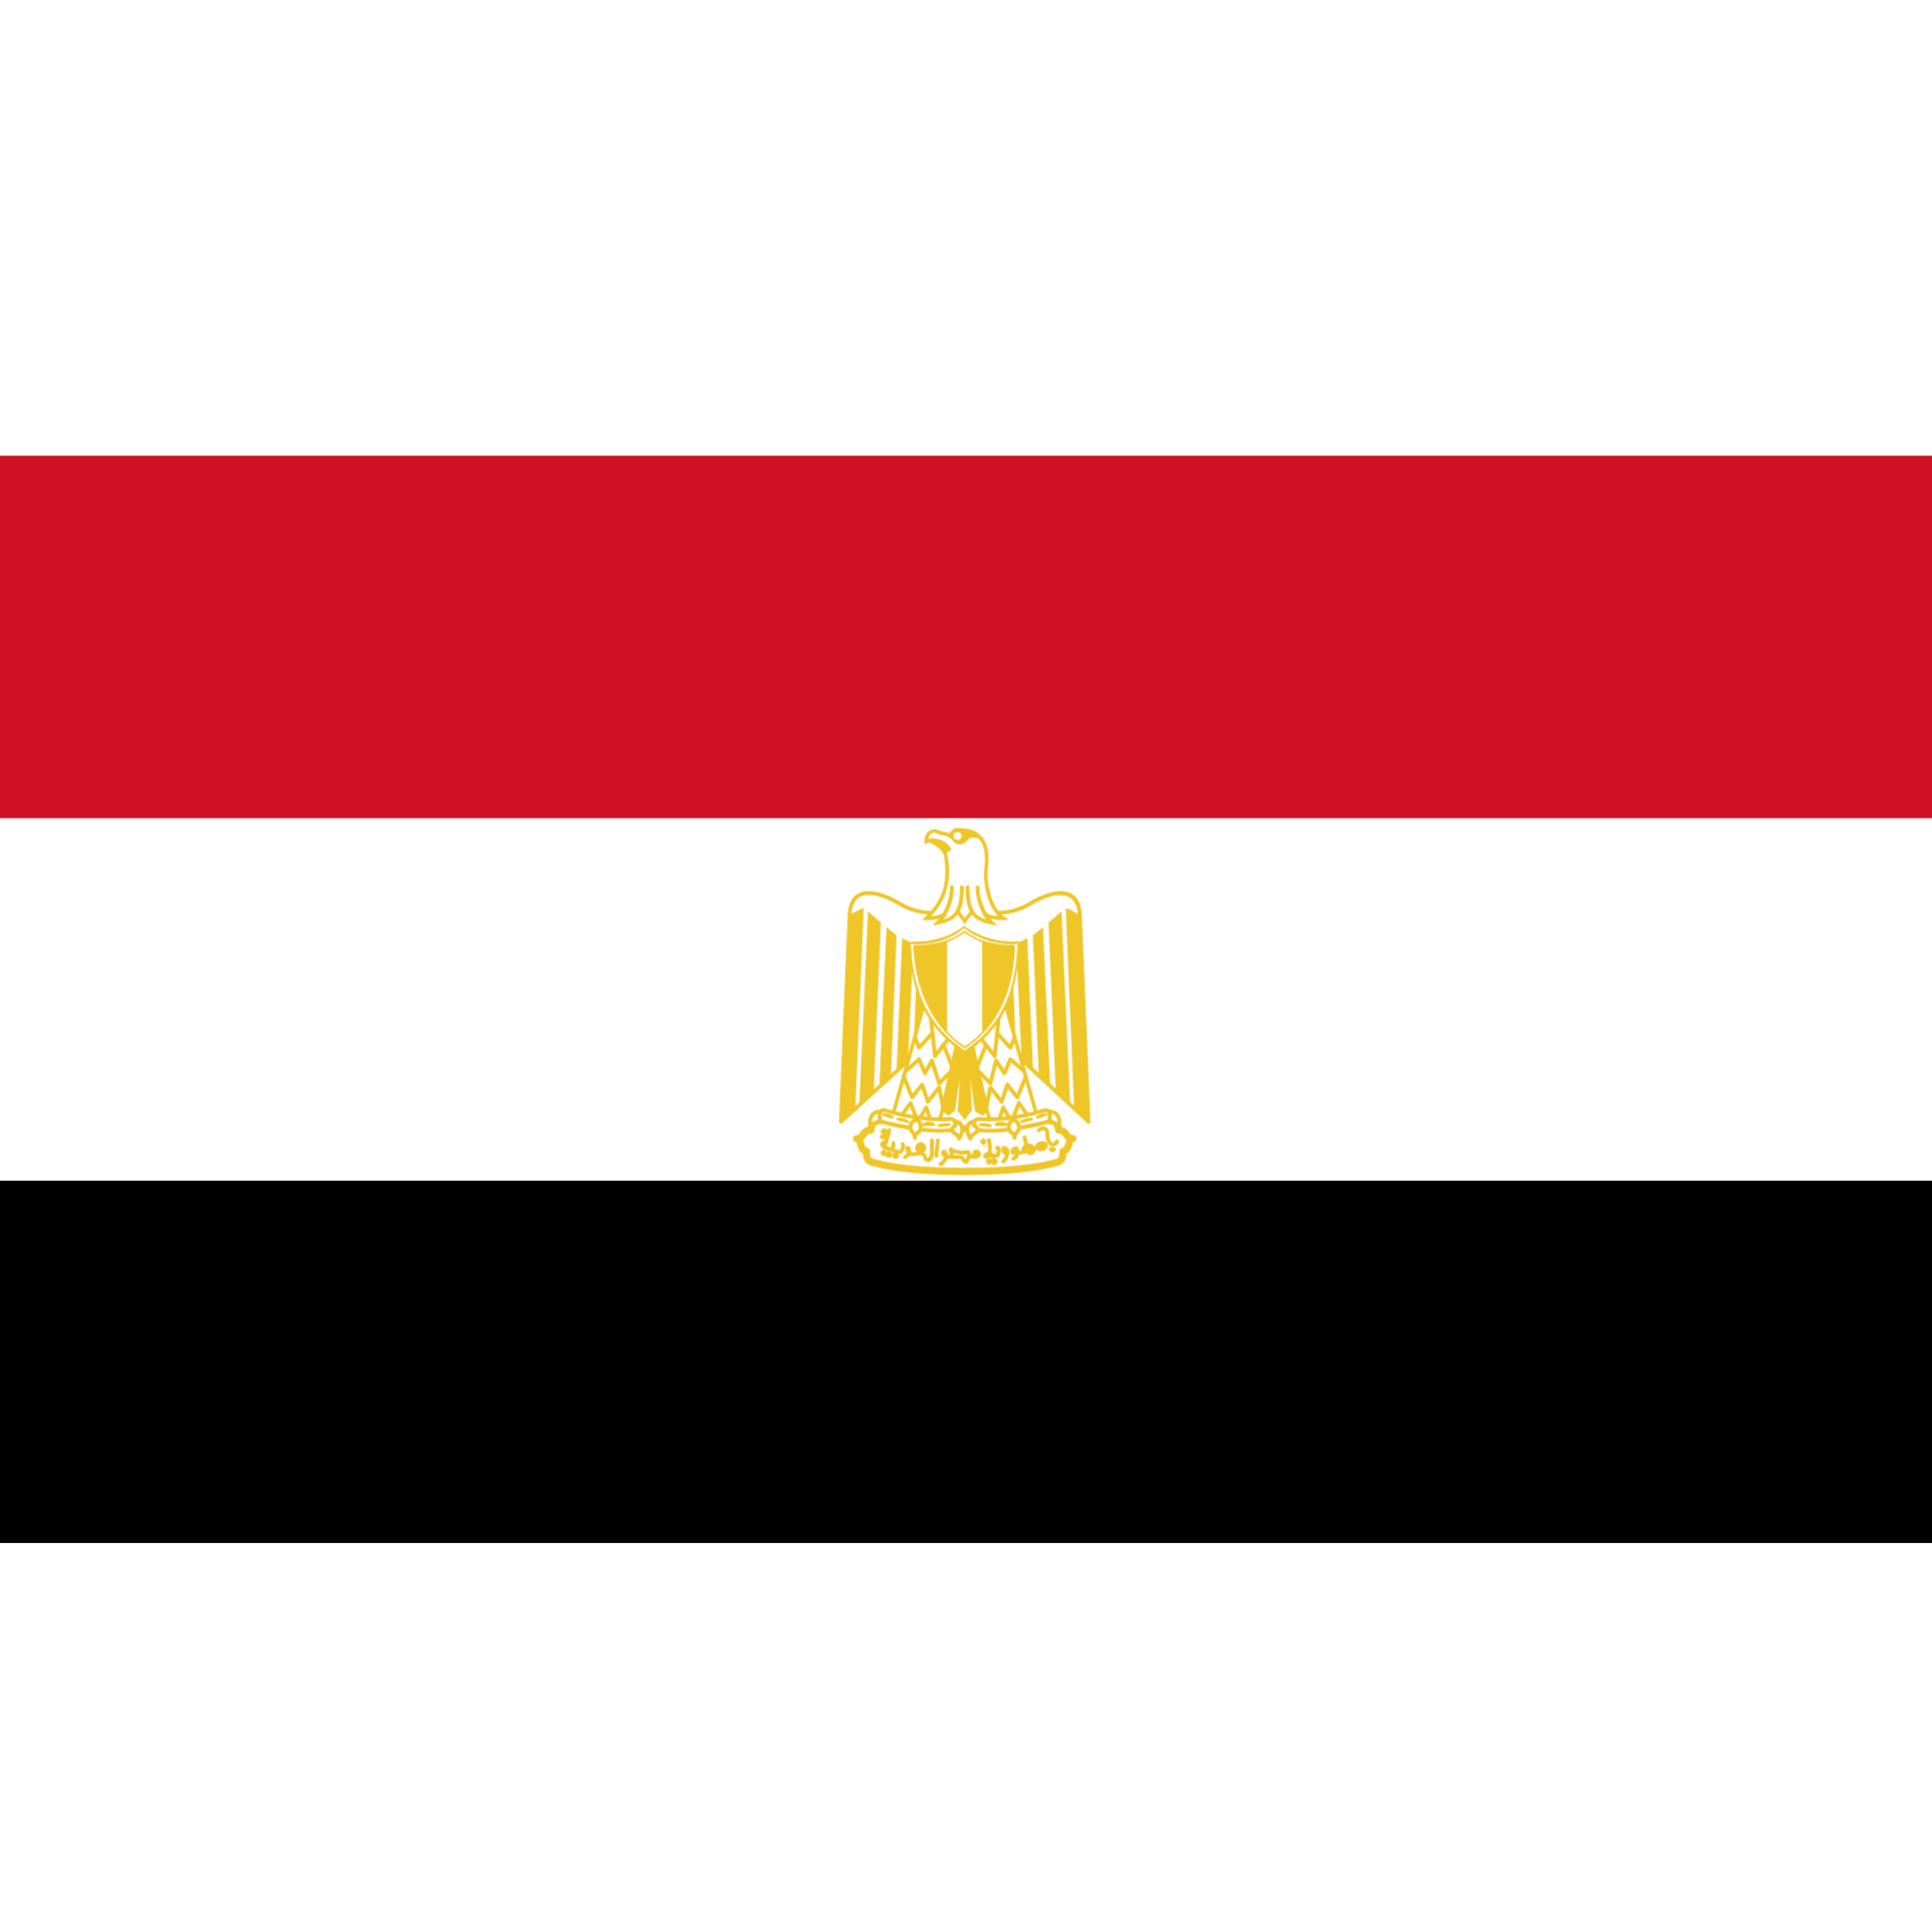 The flag of Egypt has three equal horizontal red, white, and black stripes, with the national emblem (an eagle) in the centre.